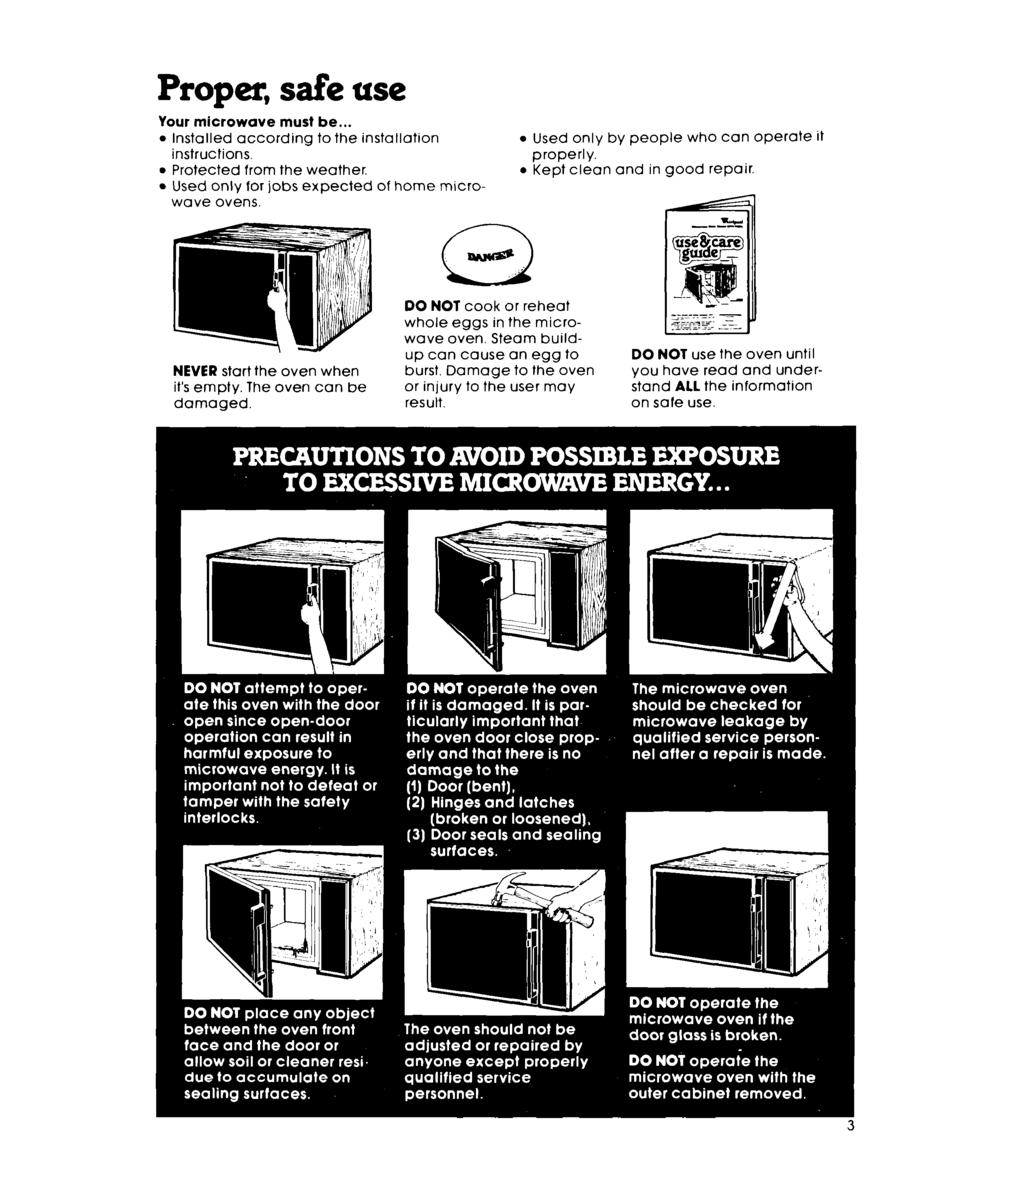 Proper, safe use Your microwave must be... Installed according to the installation instructions. Protected from the weather. Used only for jobs expected of home microwave ovens.